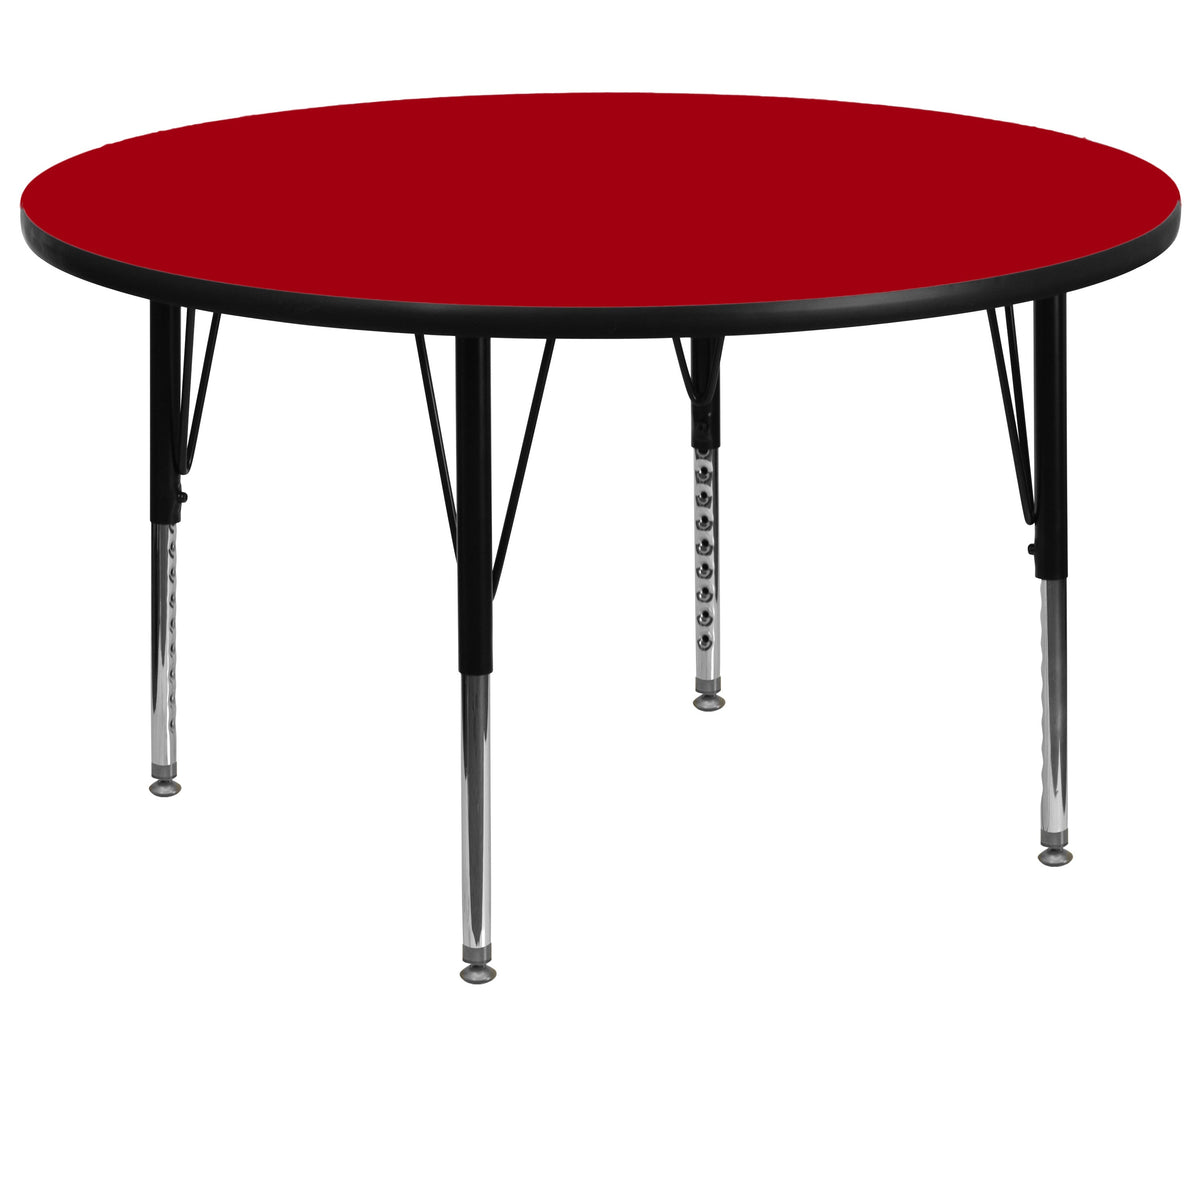 Red |#| 60inch Round Red Thermal Laminate Activity Table - Height Adjustable Short Legs